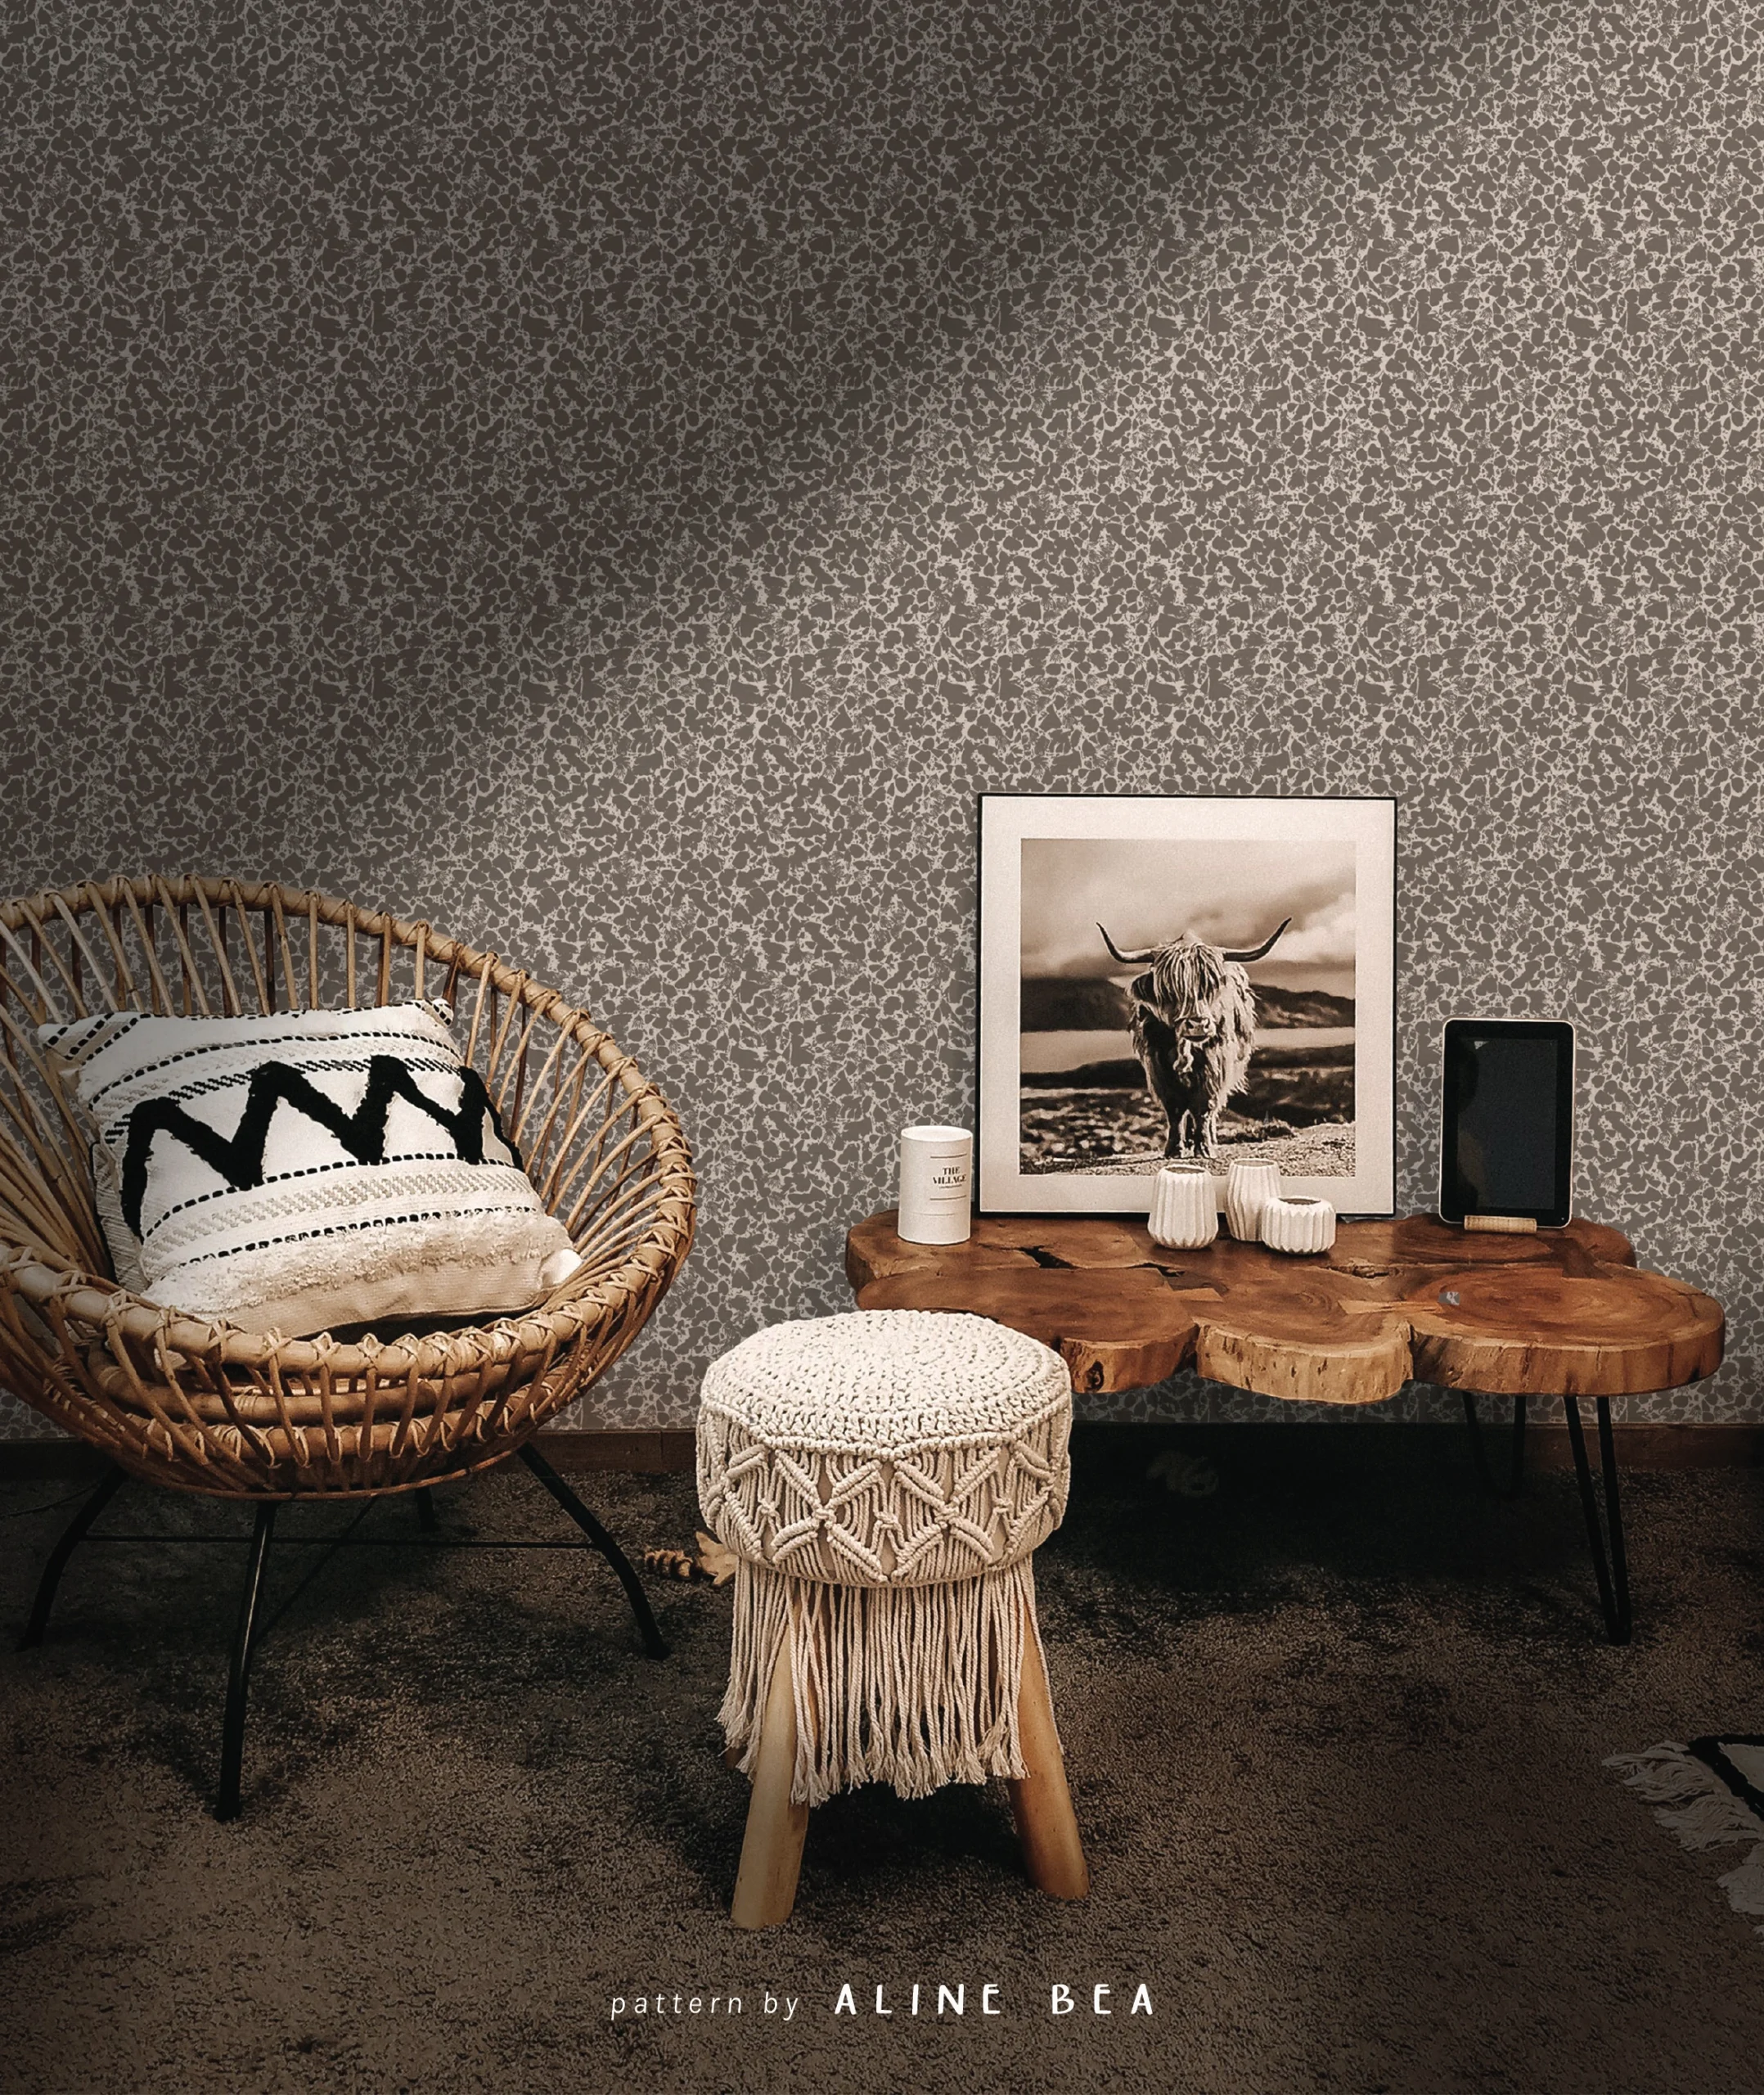 Farmhouse interior scene, displaying a wall covered by textured wallpaper by Aline Bea, a chair with a pillow, a wooden small coffee table and a small wooden bench.